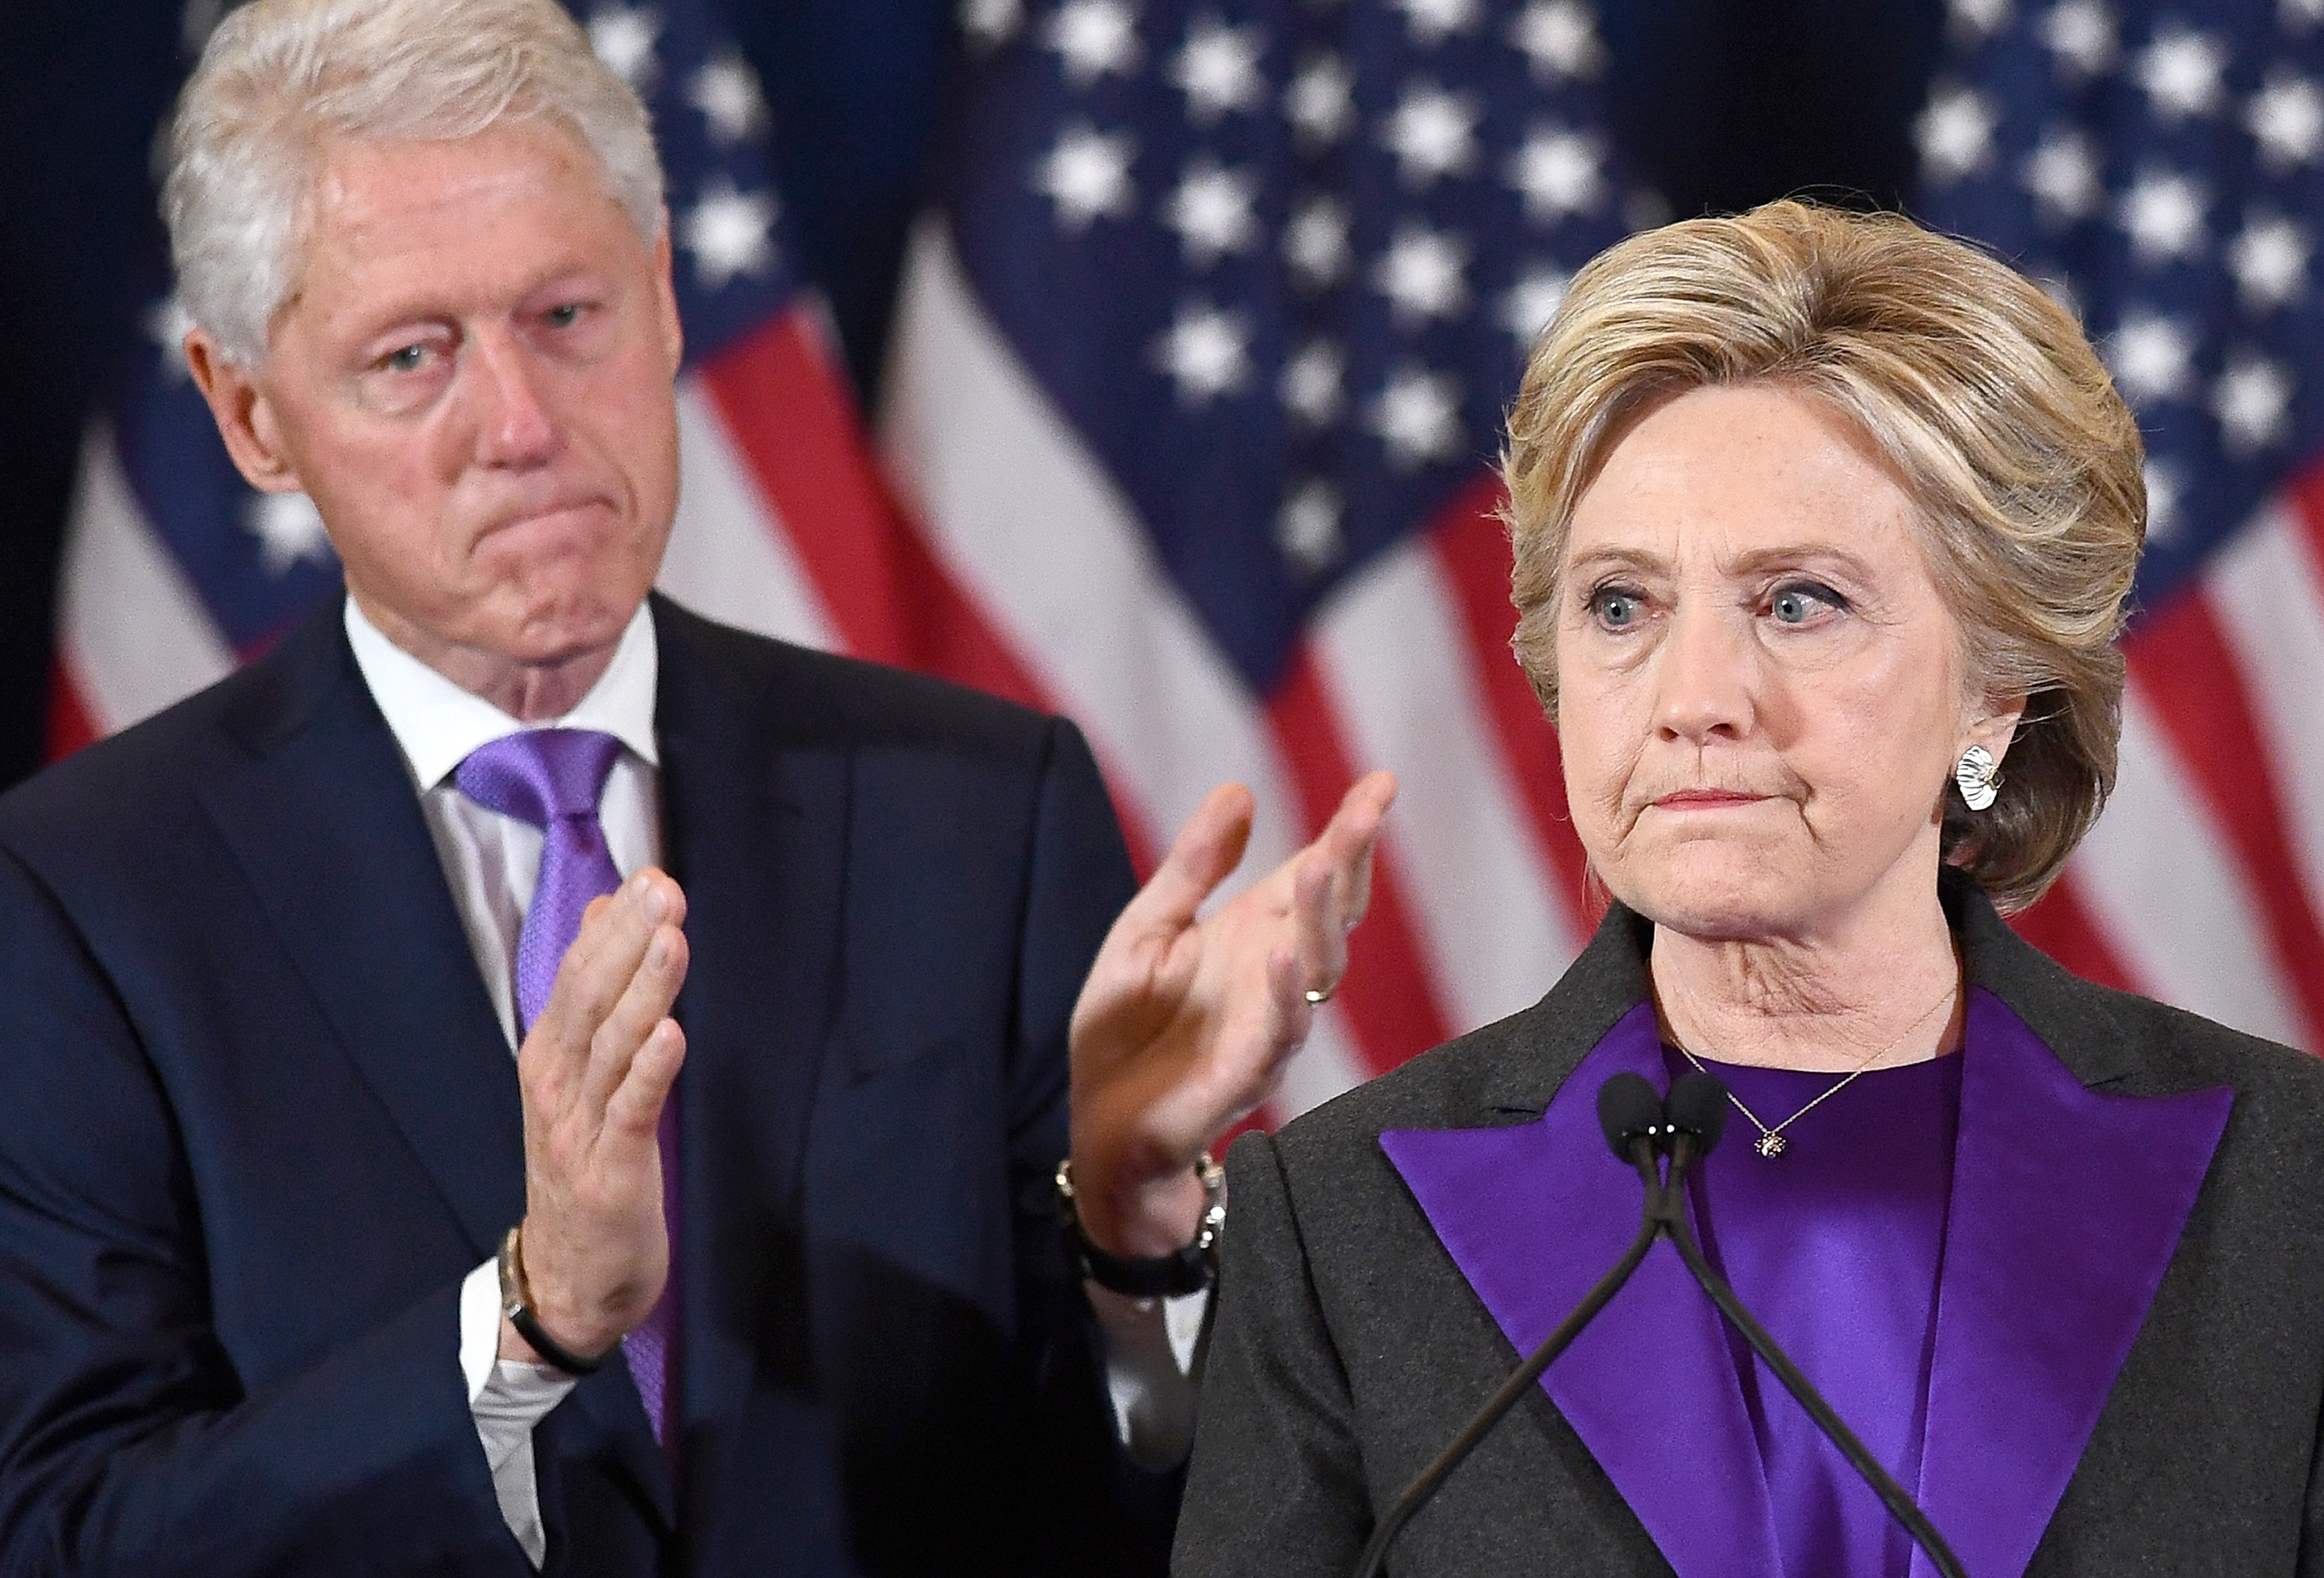 US Democratic presidential candidate Hillary Clinton makes a concession speech after being defeated by Republican President-elect Donald Trump, as former President Bill Clinton looks on in New York on November 9, 2016. / AFP PHOTO / JEWEL SAMAD